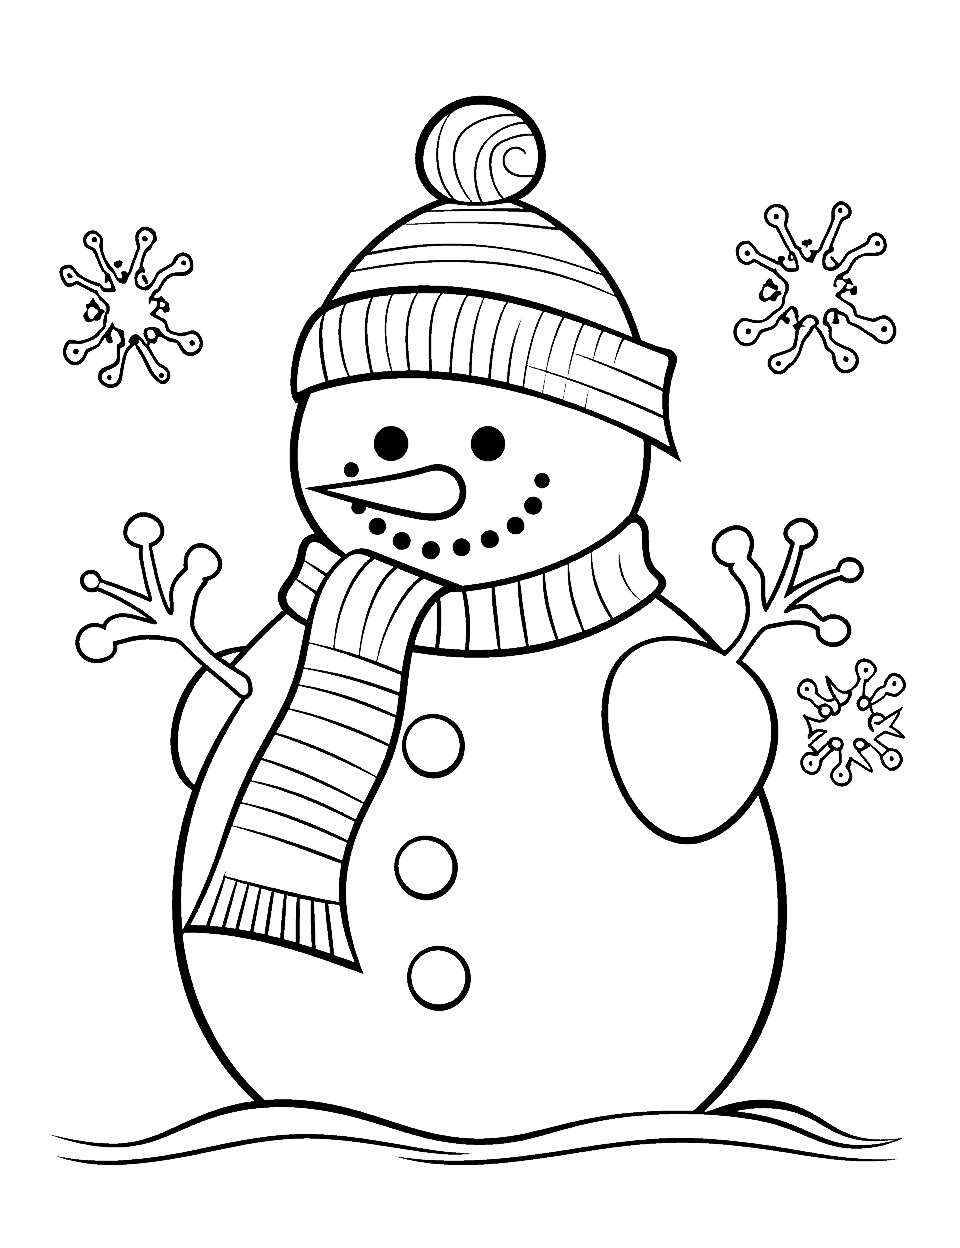 Simple Snowman Winter Coloring Page - An easy-to-color snowman perfect for young kids.